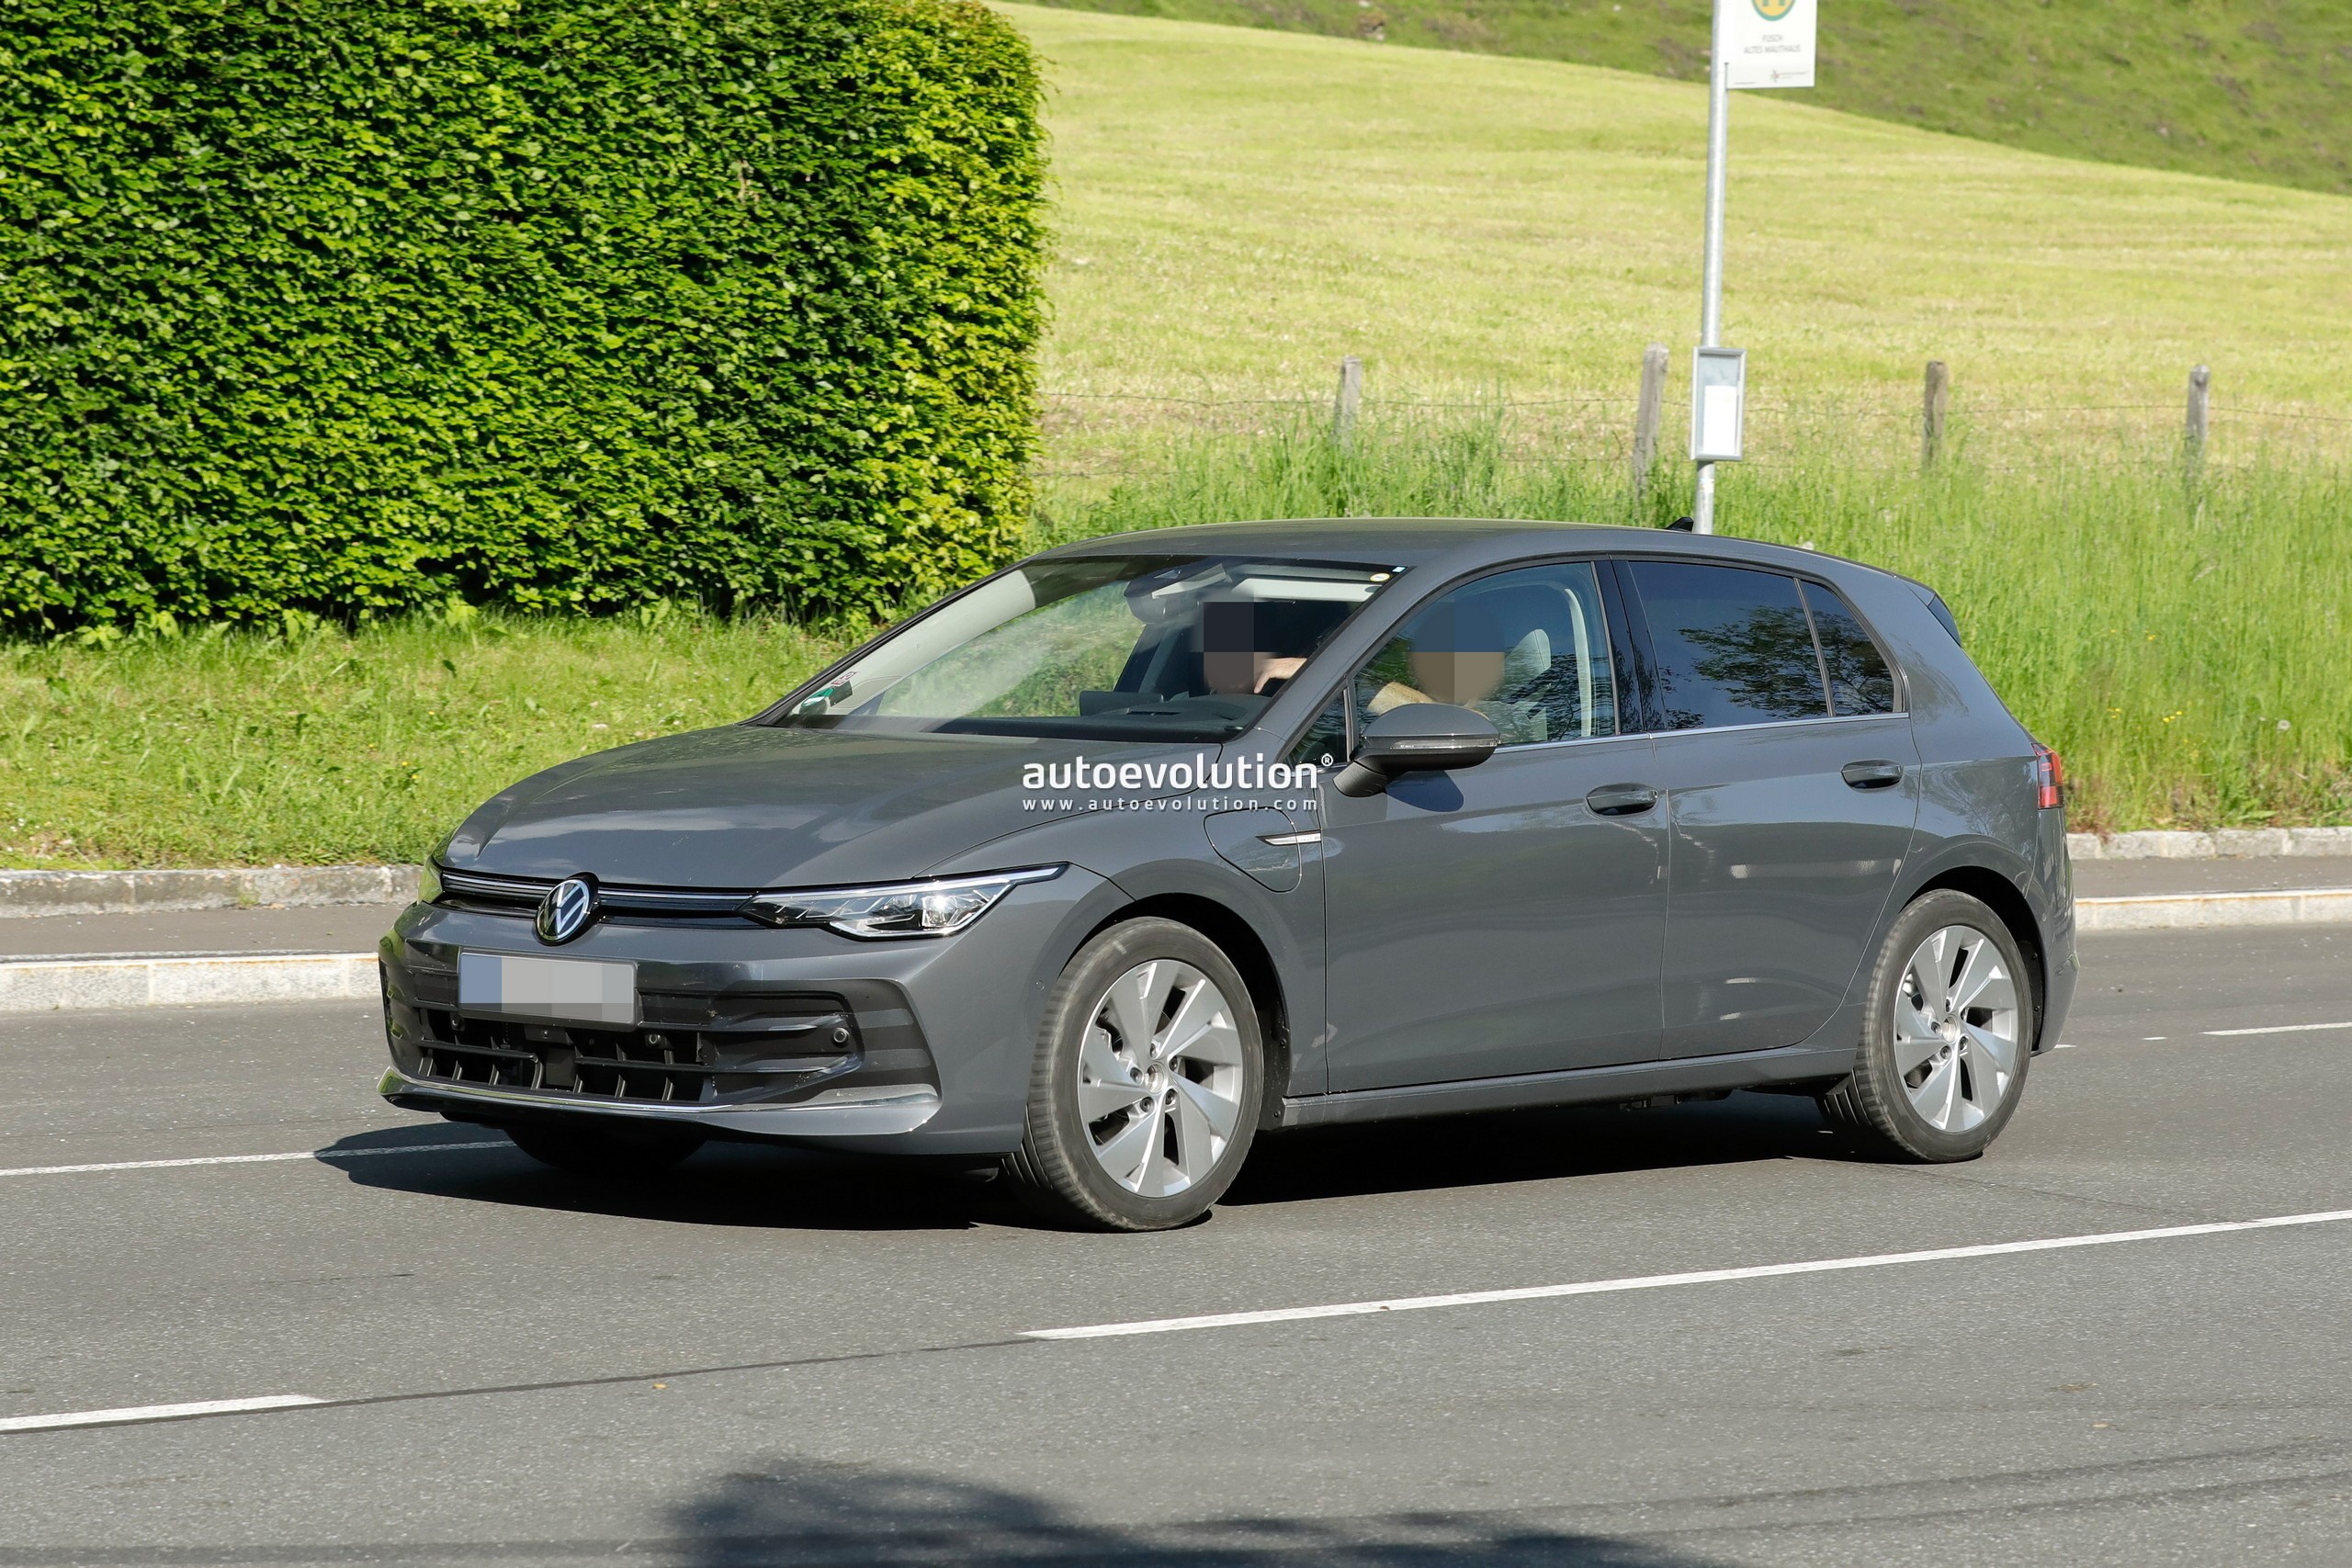 2024 Vw Golf Caught Undisguised Facelifted Hatch Shows Big Infotainment Screen 16 